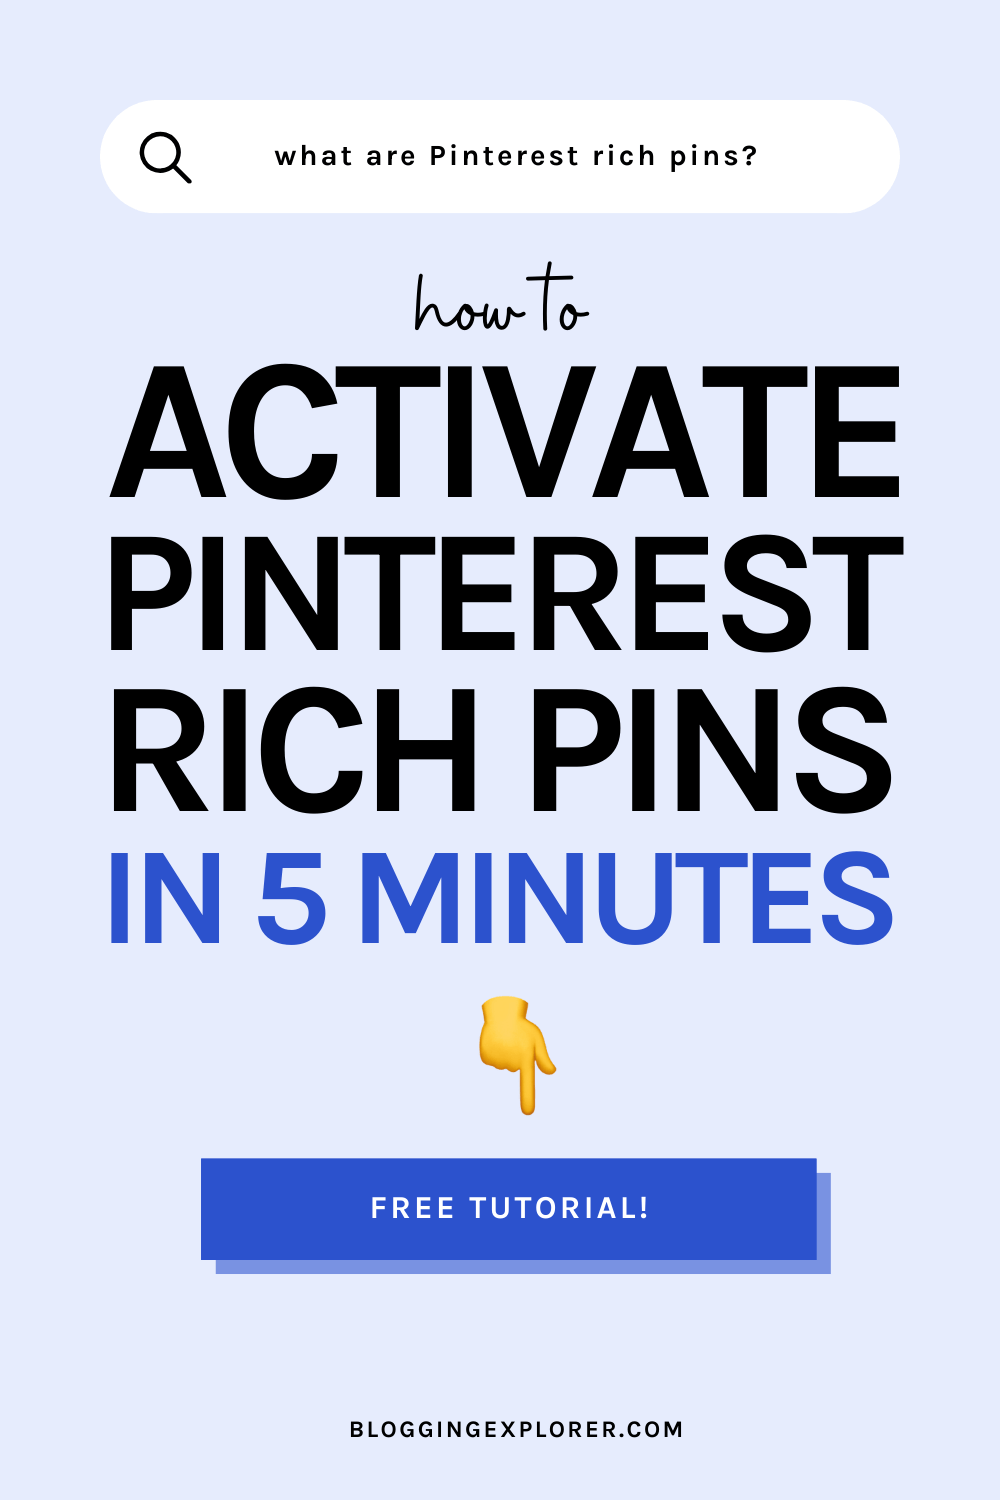 How to activate Pinterest rich pins in 5 minutes